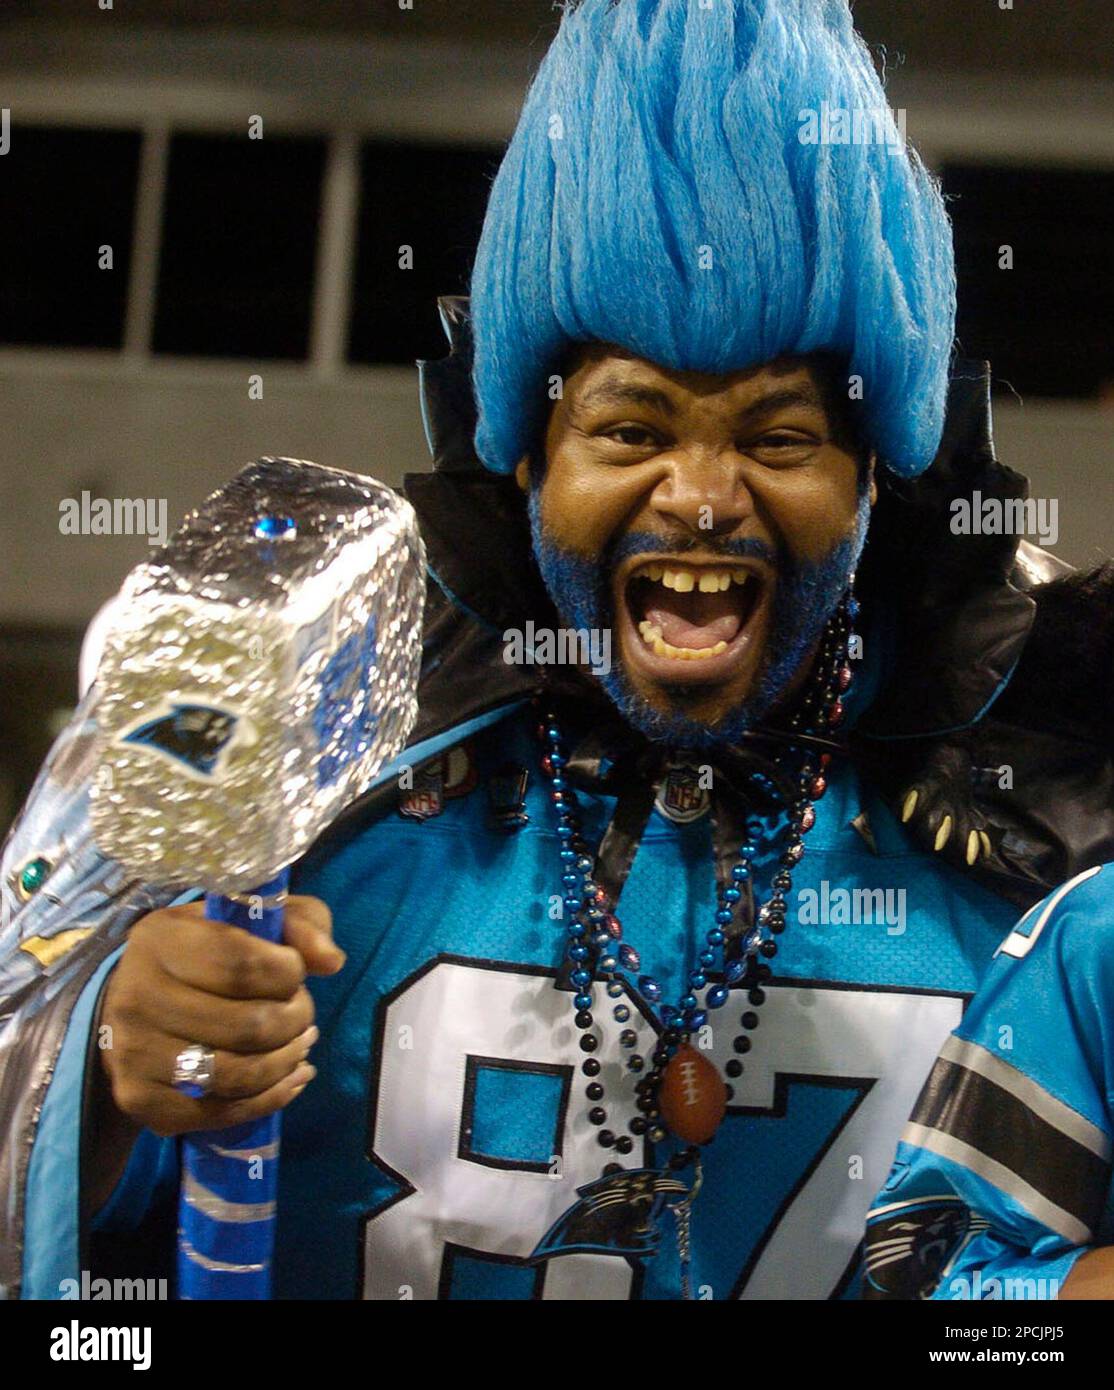 https://c8.alamy.com/comp/2PCJPJ5/carolina-panthers-fan-greg-catman-good-demonstrates-the-panther-growl-during-an-nfl-football-game-on-oct-3-2005-in-charlotte-nc-fox-sports-will-give-good-a-new-pickup-truck-after-an-on-air-practical-joke-by-the-networks-broadcast-team-during-a-preseason-game-between-carolina-and-miami-went-wrong-ap-photocharlotte-observer-t-ortega-gaines-2PCJPJ5.jpg